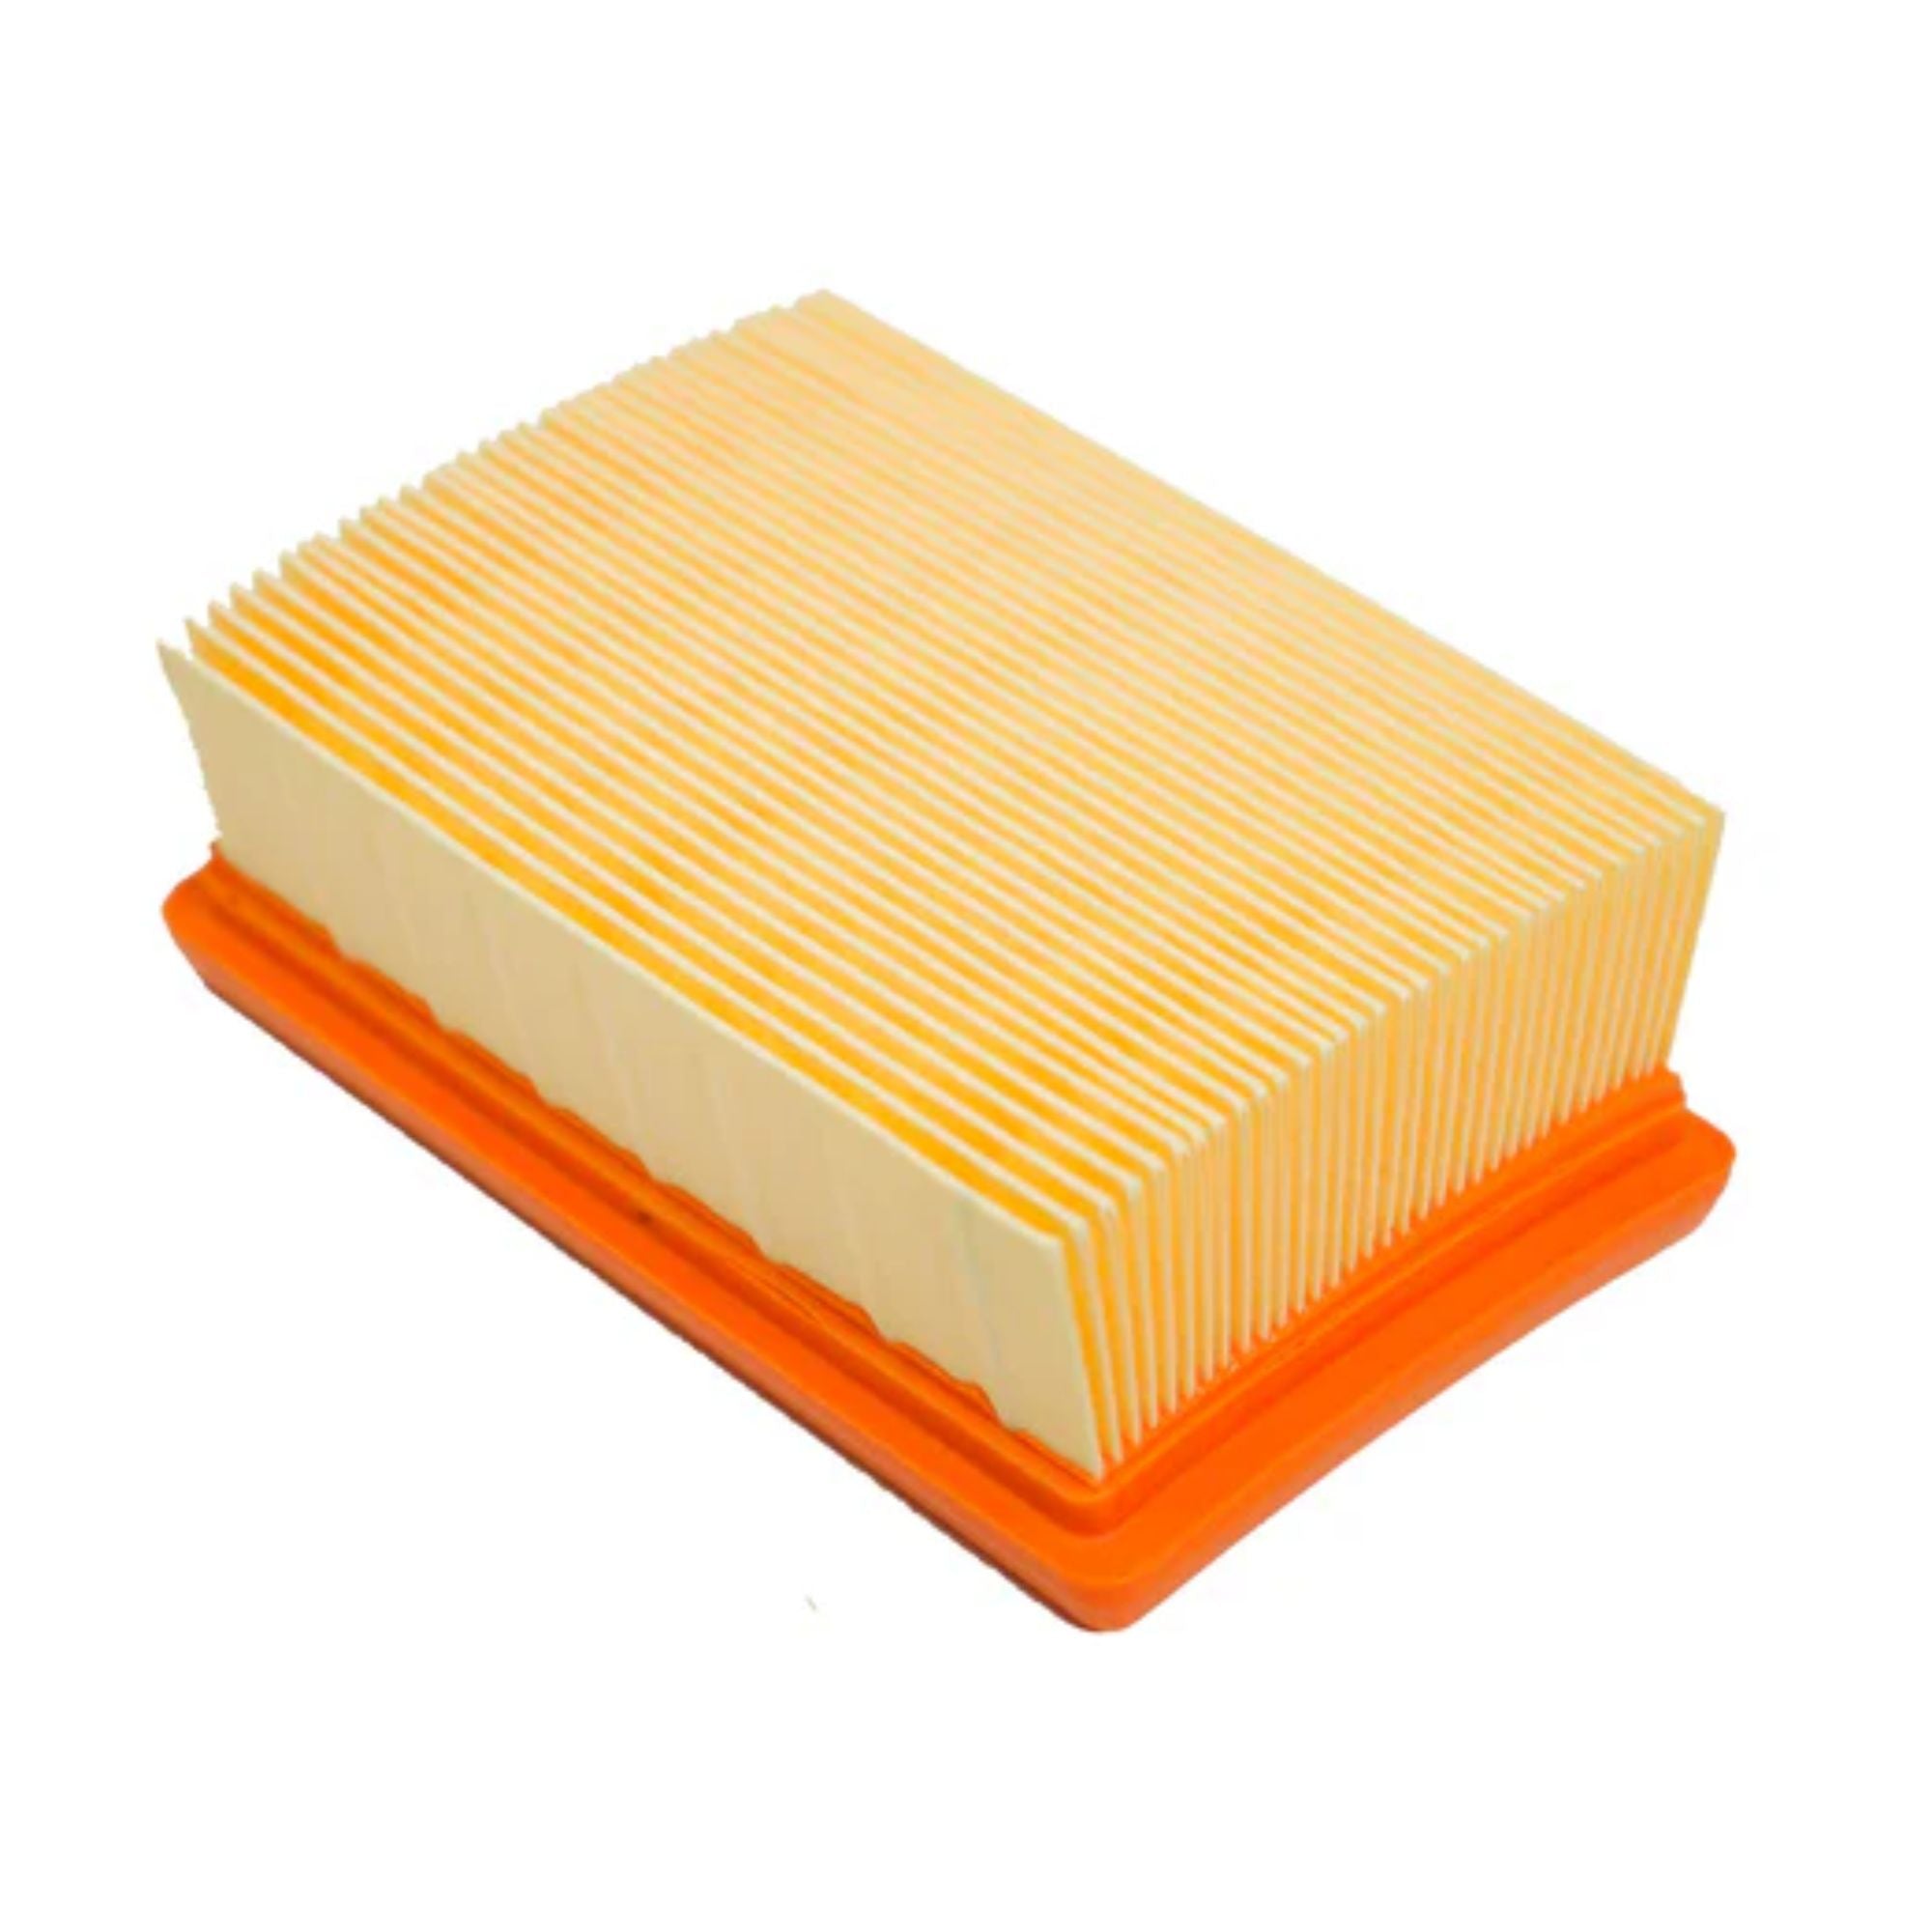 STIHL Air Filter for BR430 | 4223 141 0300